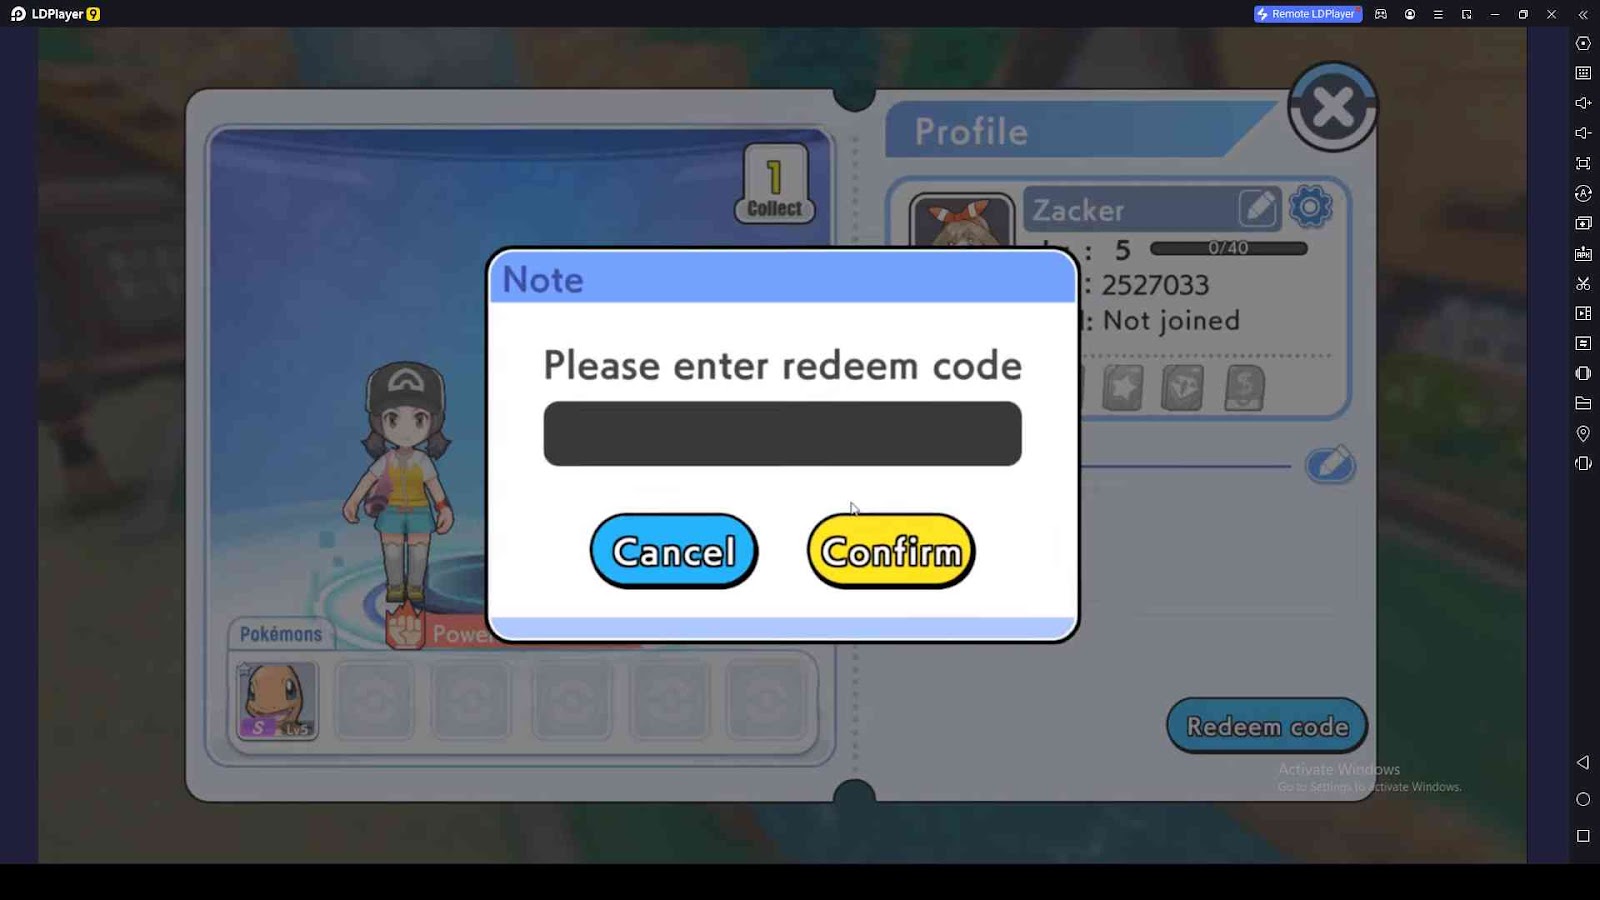 Redeeming Process for the Codes in Monster Island